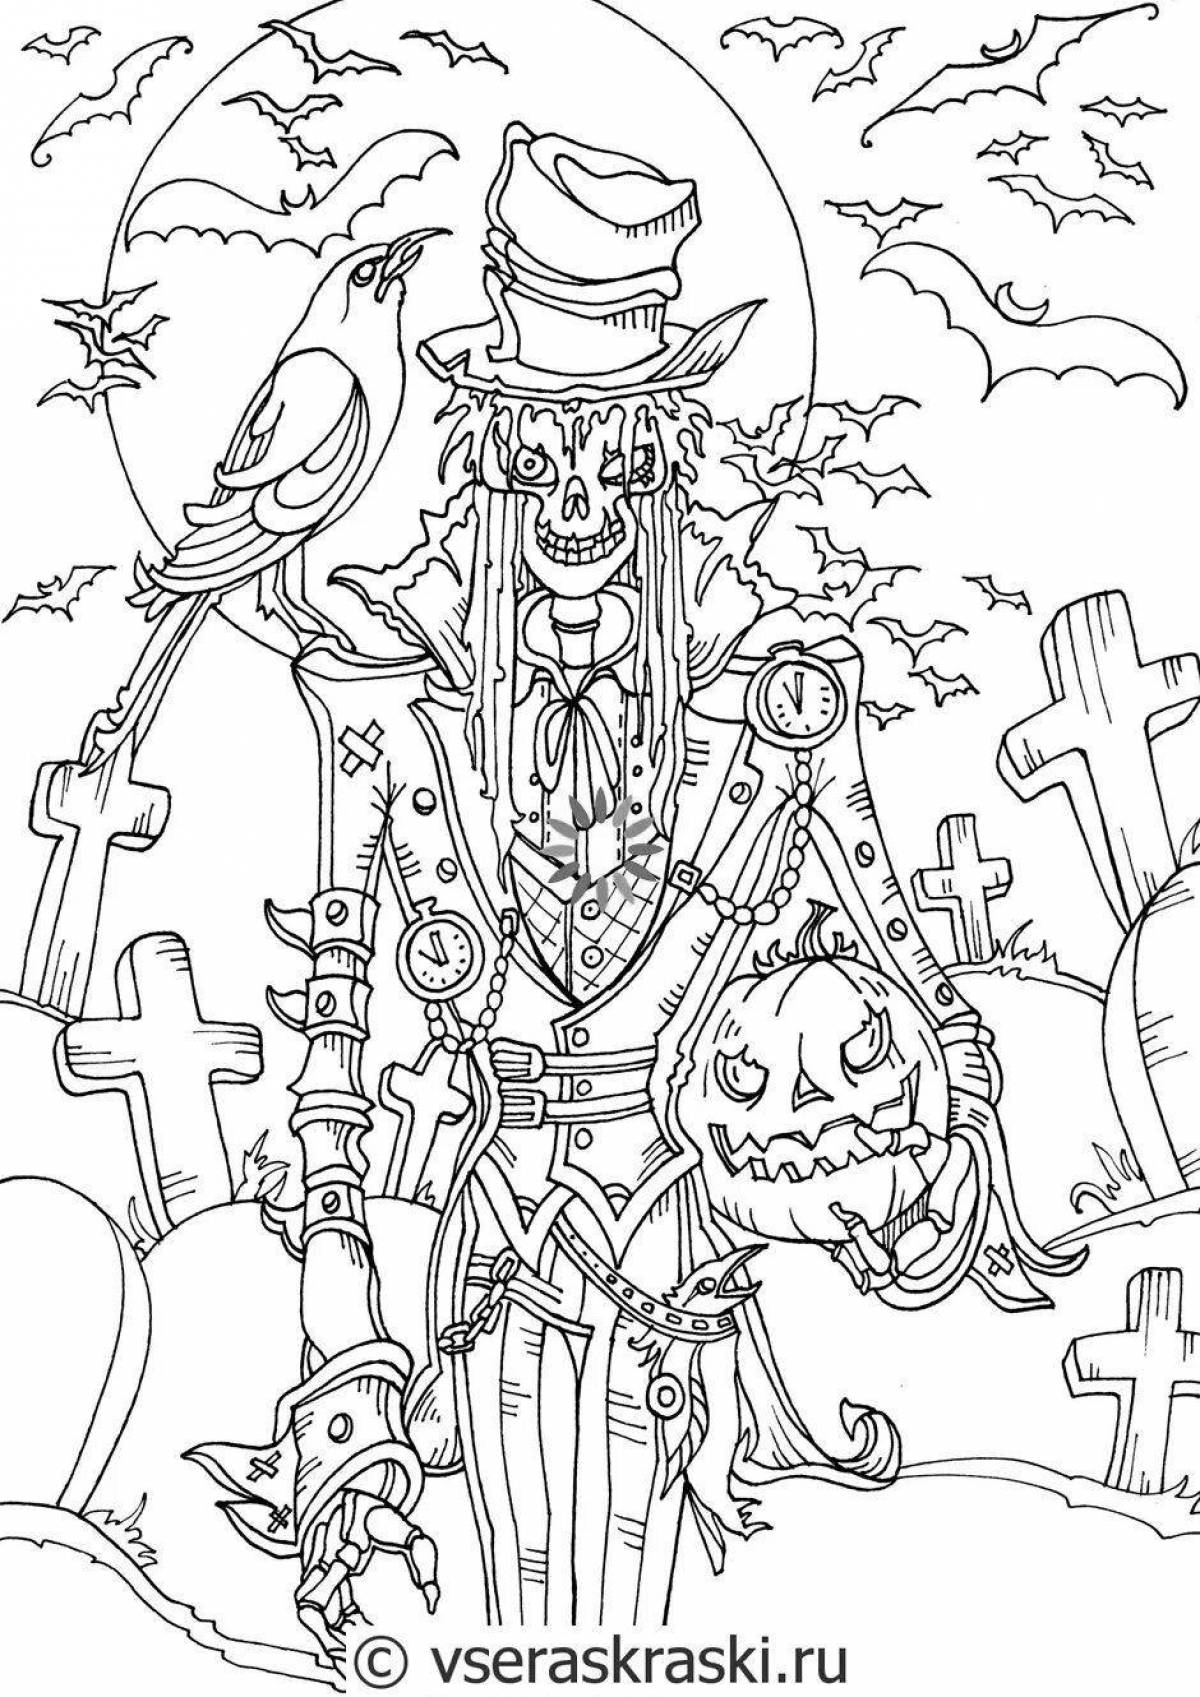 Repulsive and disgusting horror coloring page